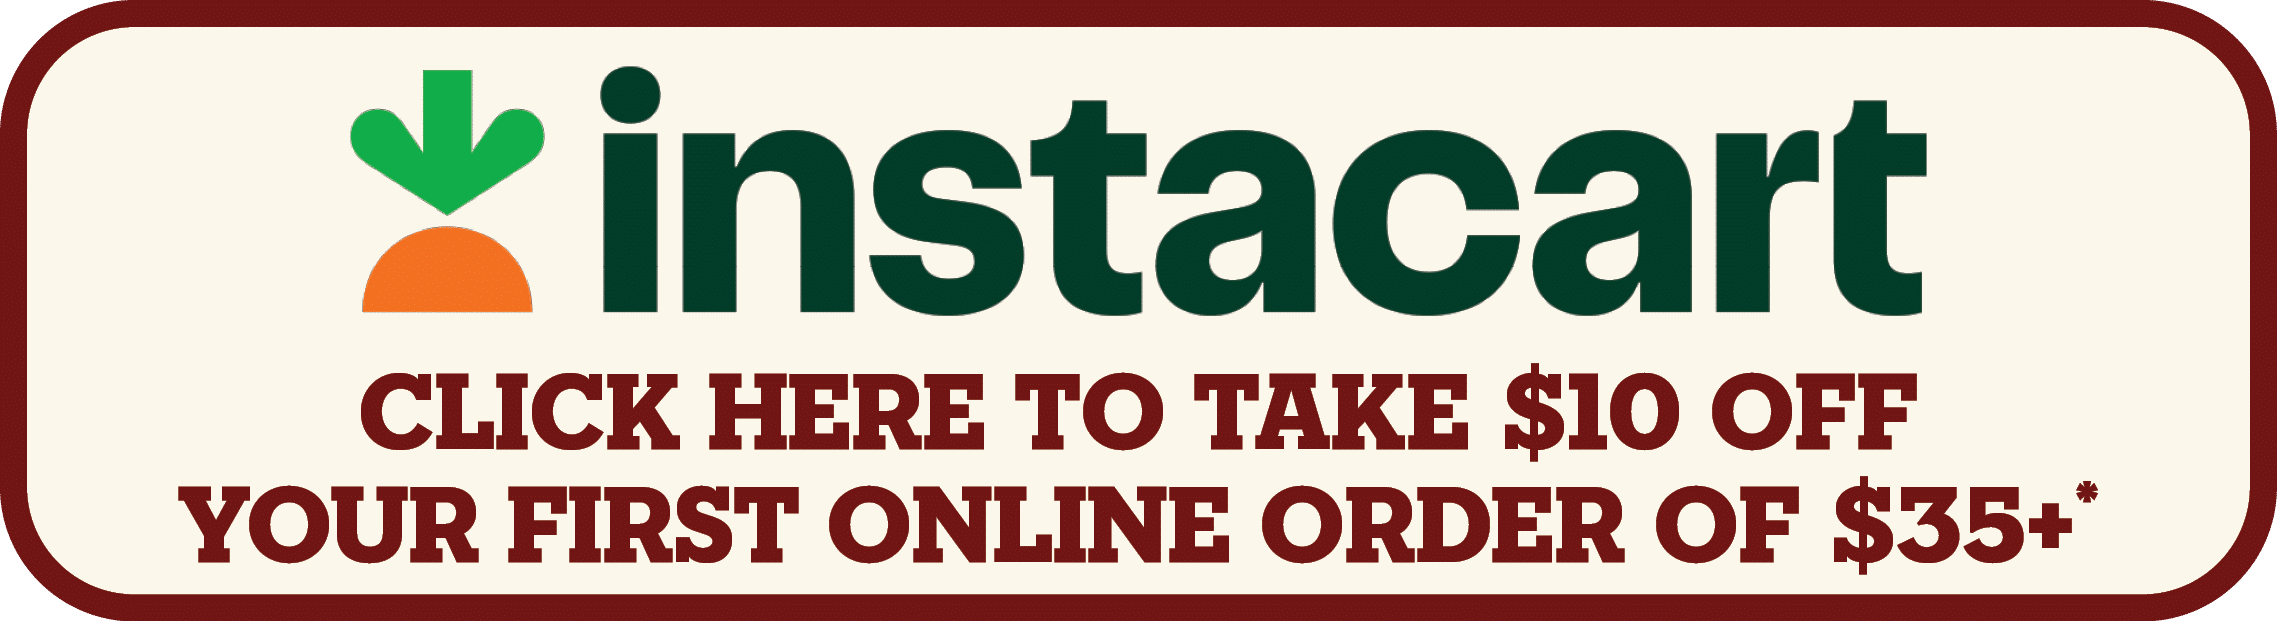 Instacart - Click here to take $10 off your first online order of $35+